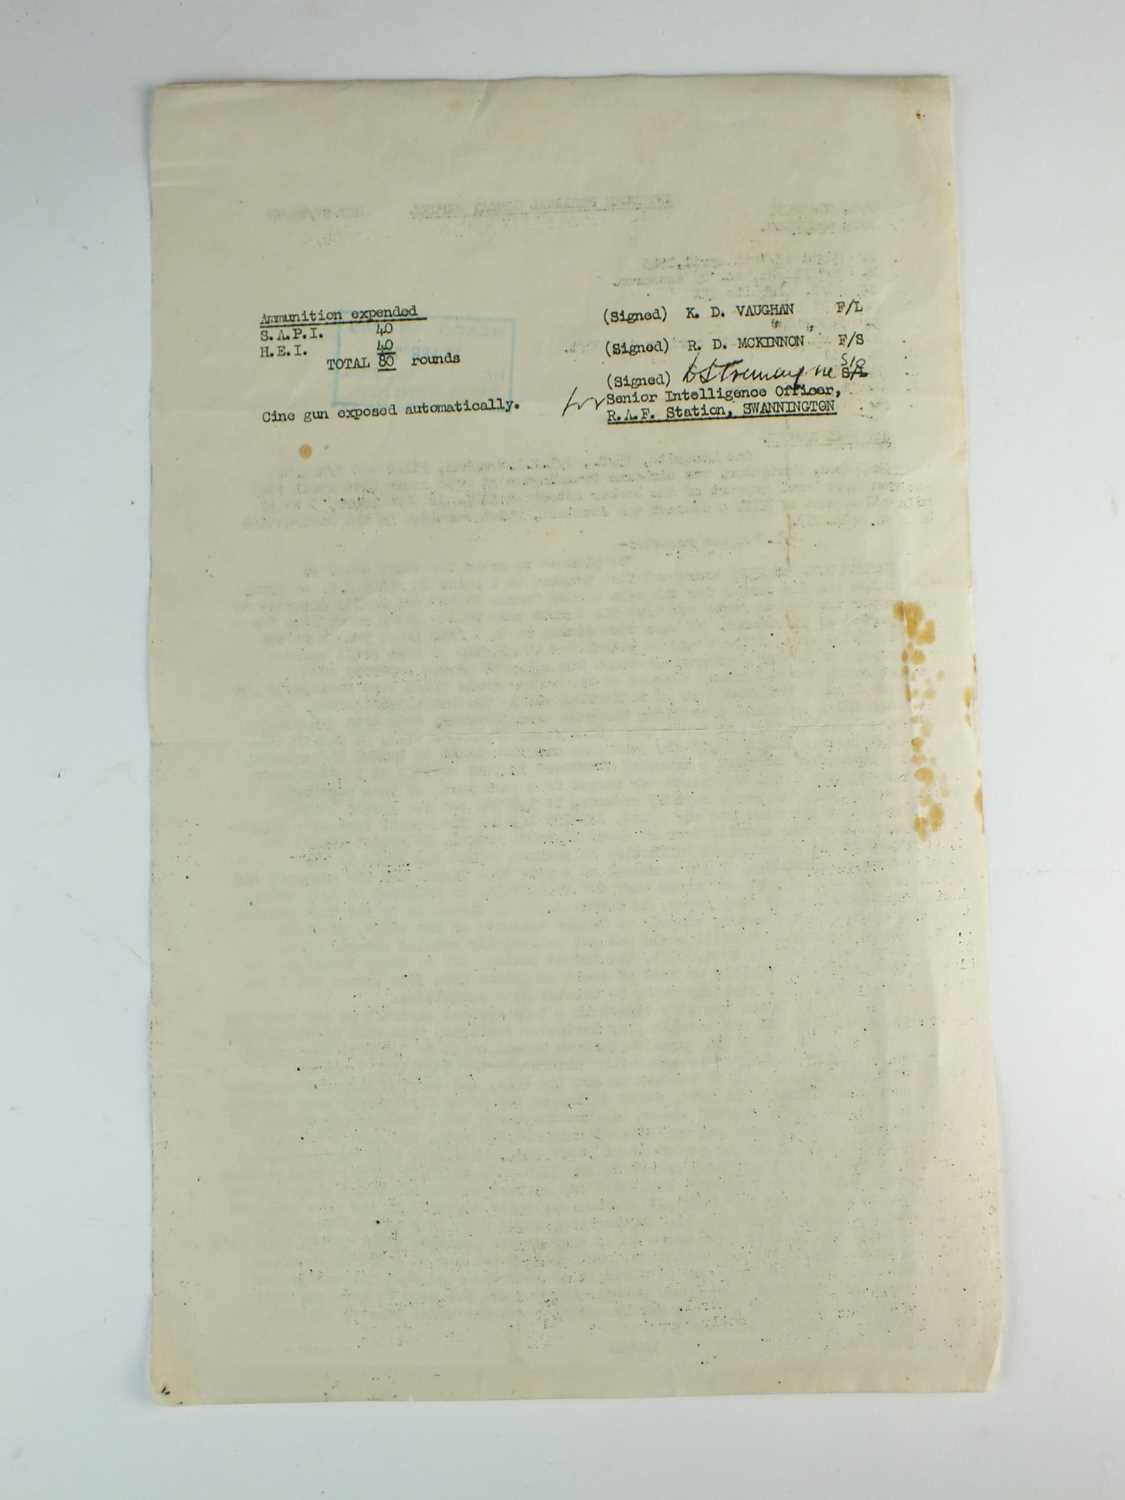 WW2 - RAF Intruder Personal Combat Report - Downed He 219 aircraft - Image 6 of 7